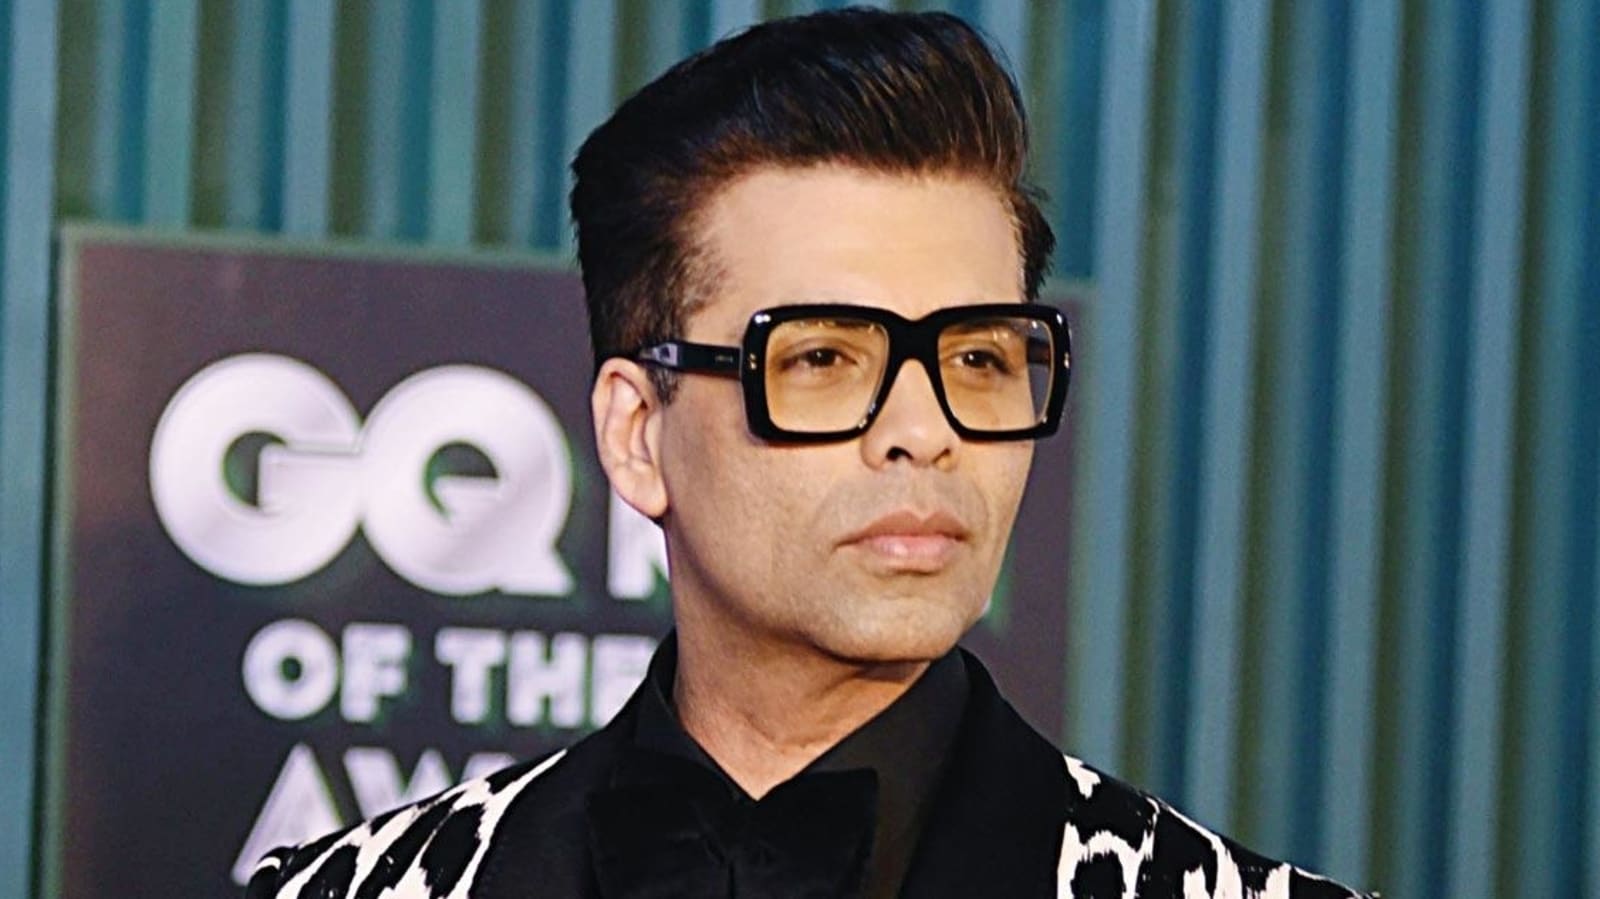 Karan Johar stresses ‘Indian cinema’, saying “We are not in the woods anymore”